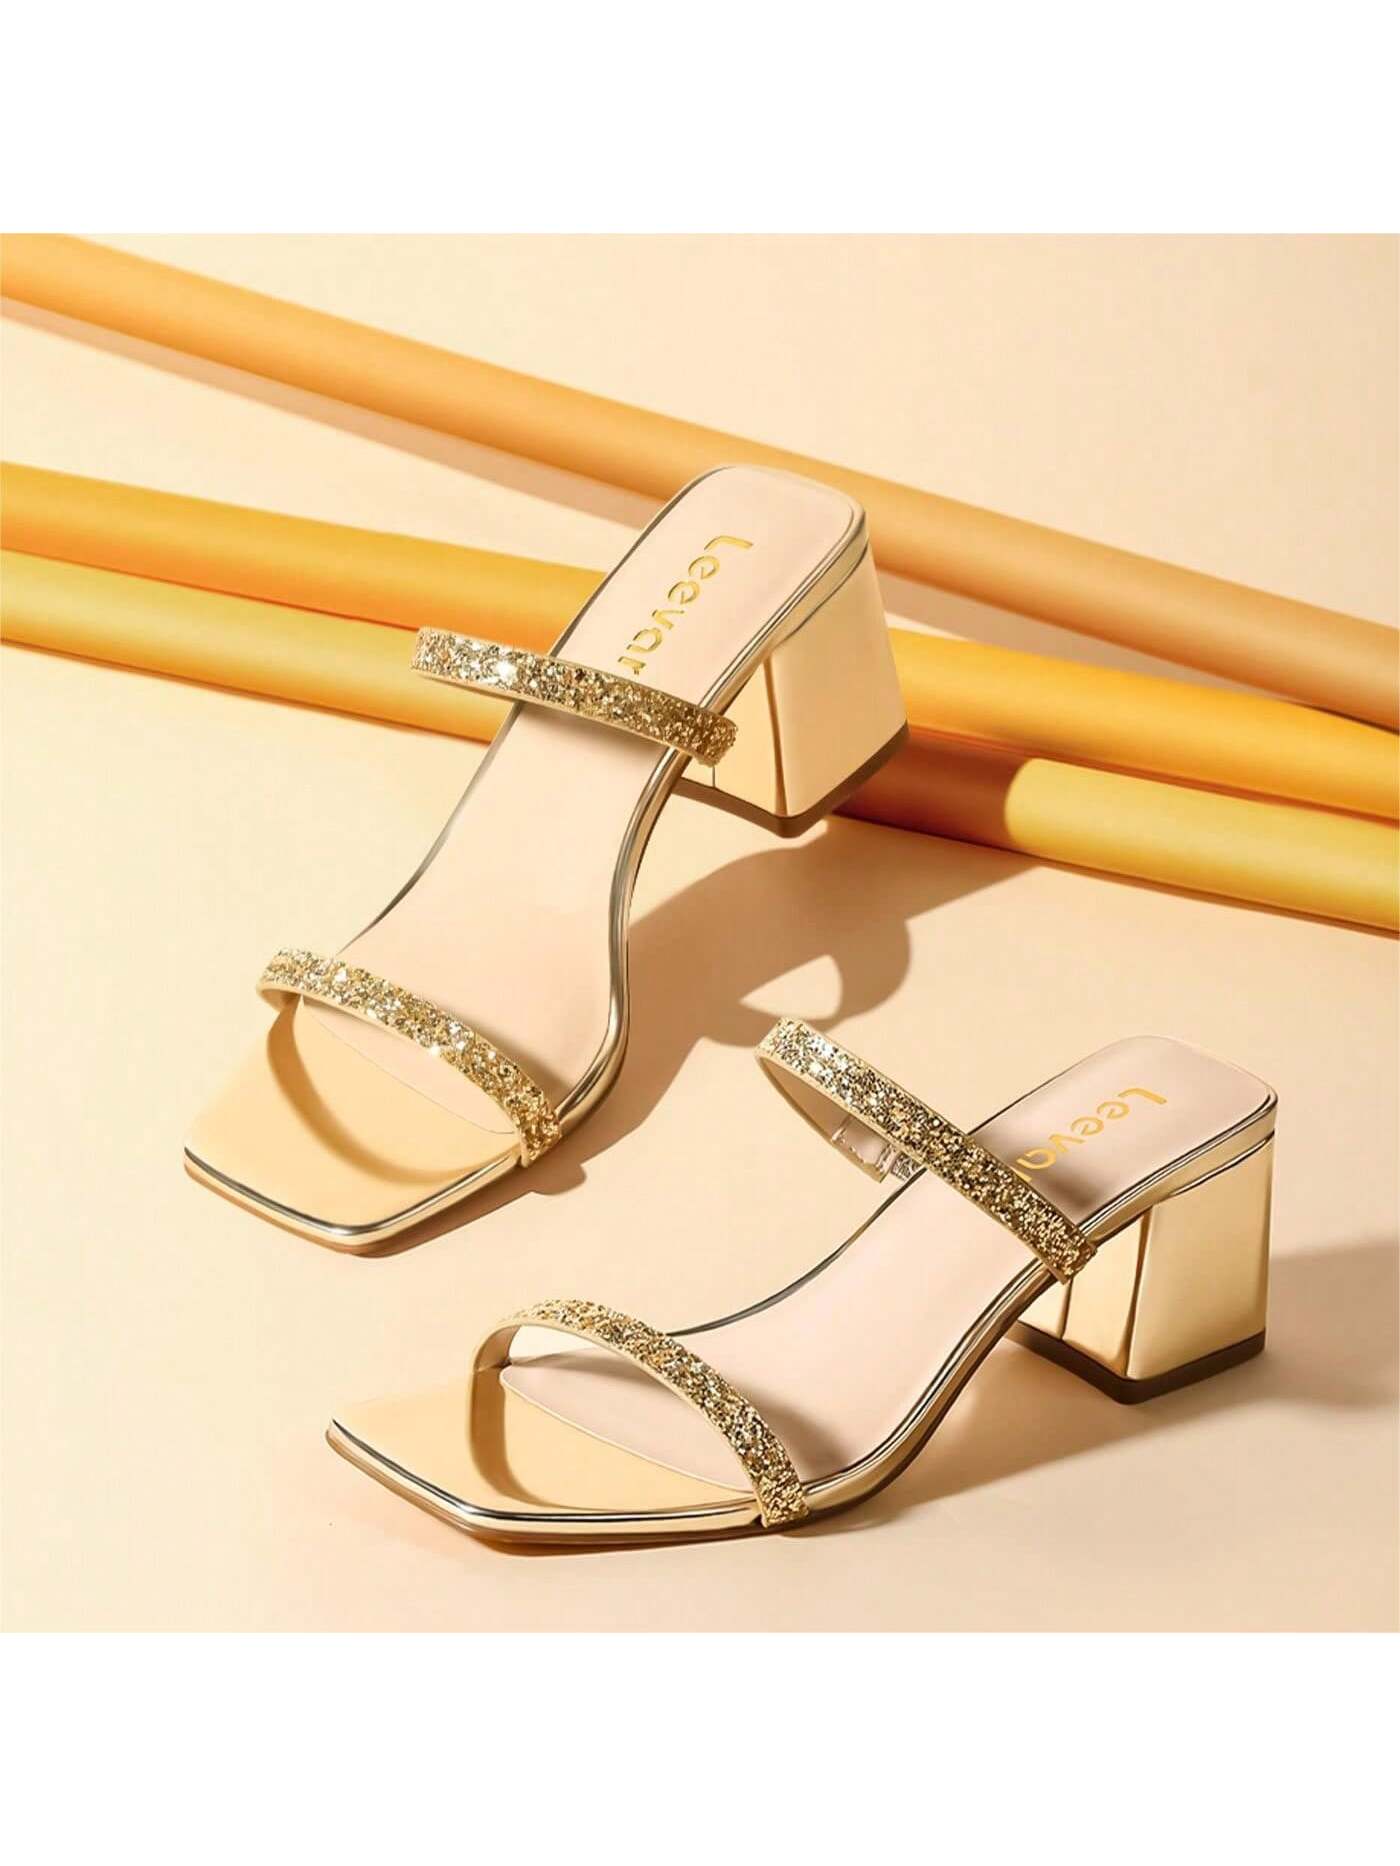 2.25IN Open Toe Ankle Strap Chunky Heels - Slip On Heeled Sandal Mule- Nude Black Strappy Heels For Party Wedding Dress Shoes-Gold-1